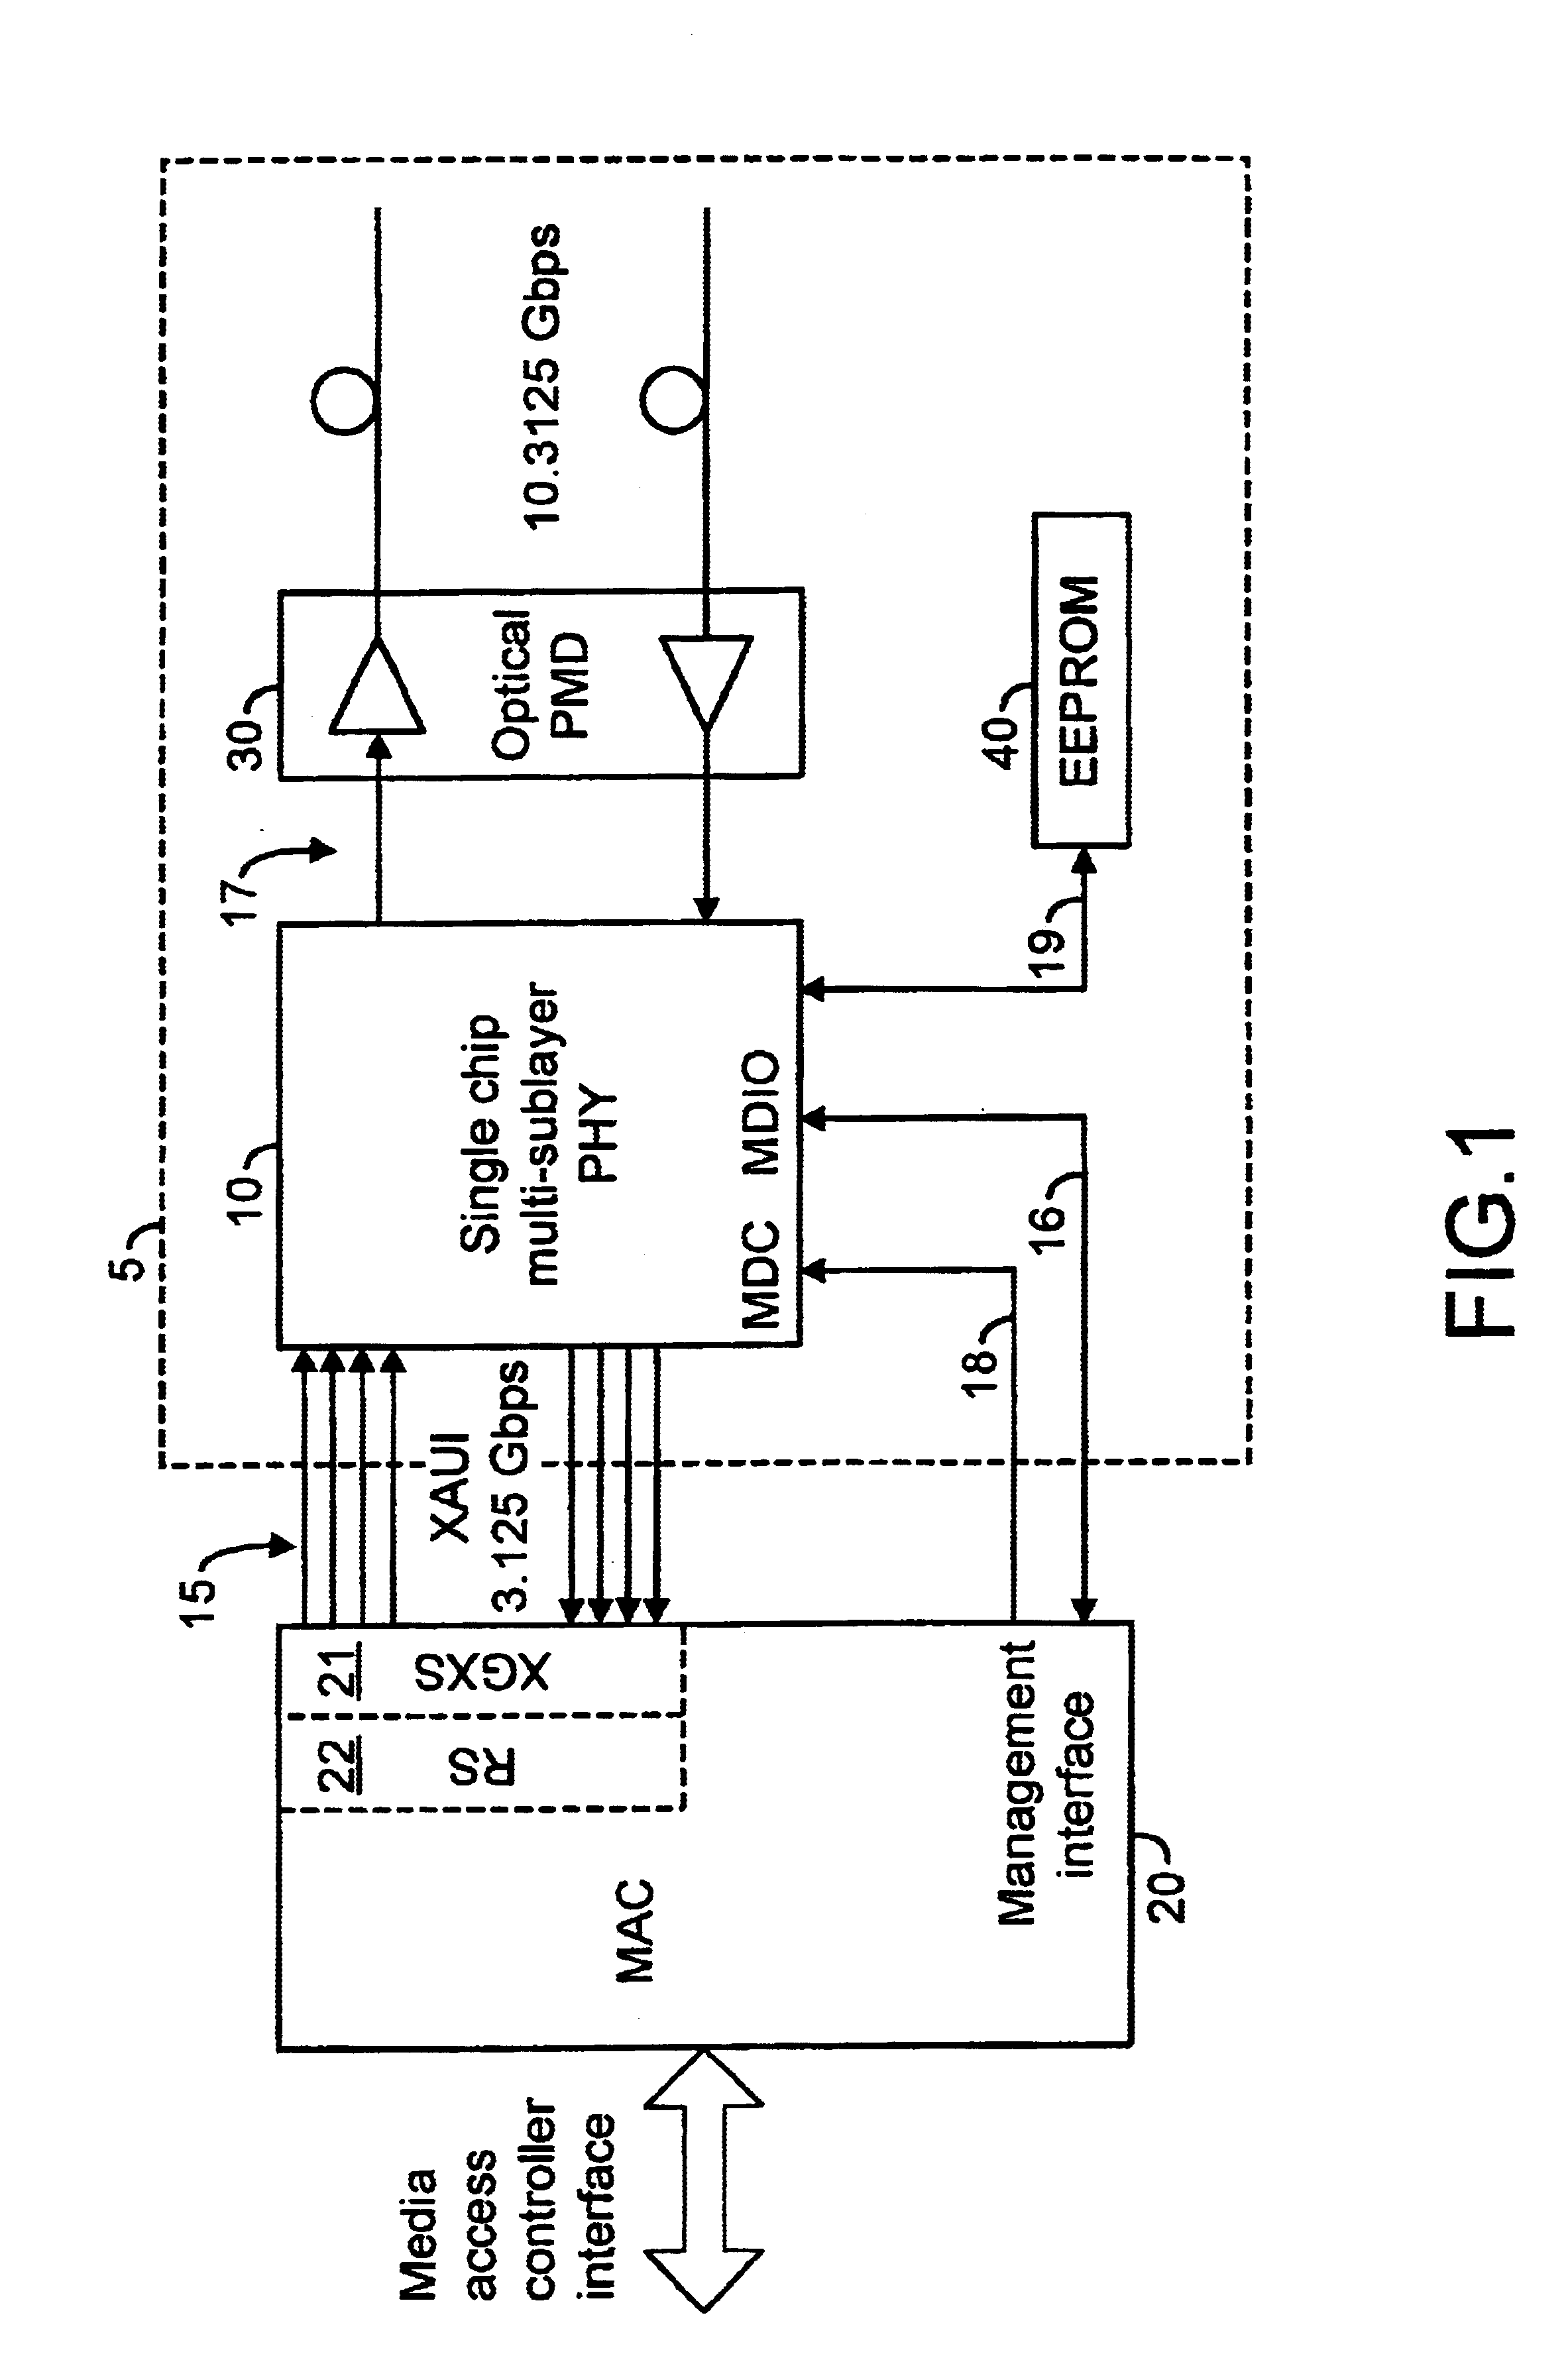 Transceiver having shadow memory facilitating on-transceiver collection and communication of local parameters